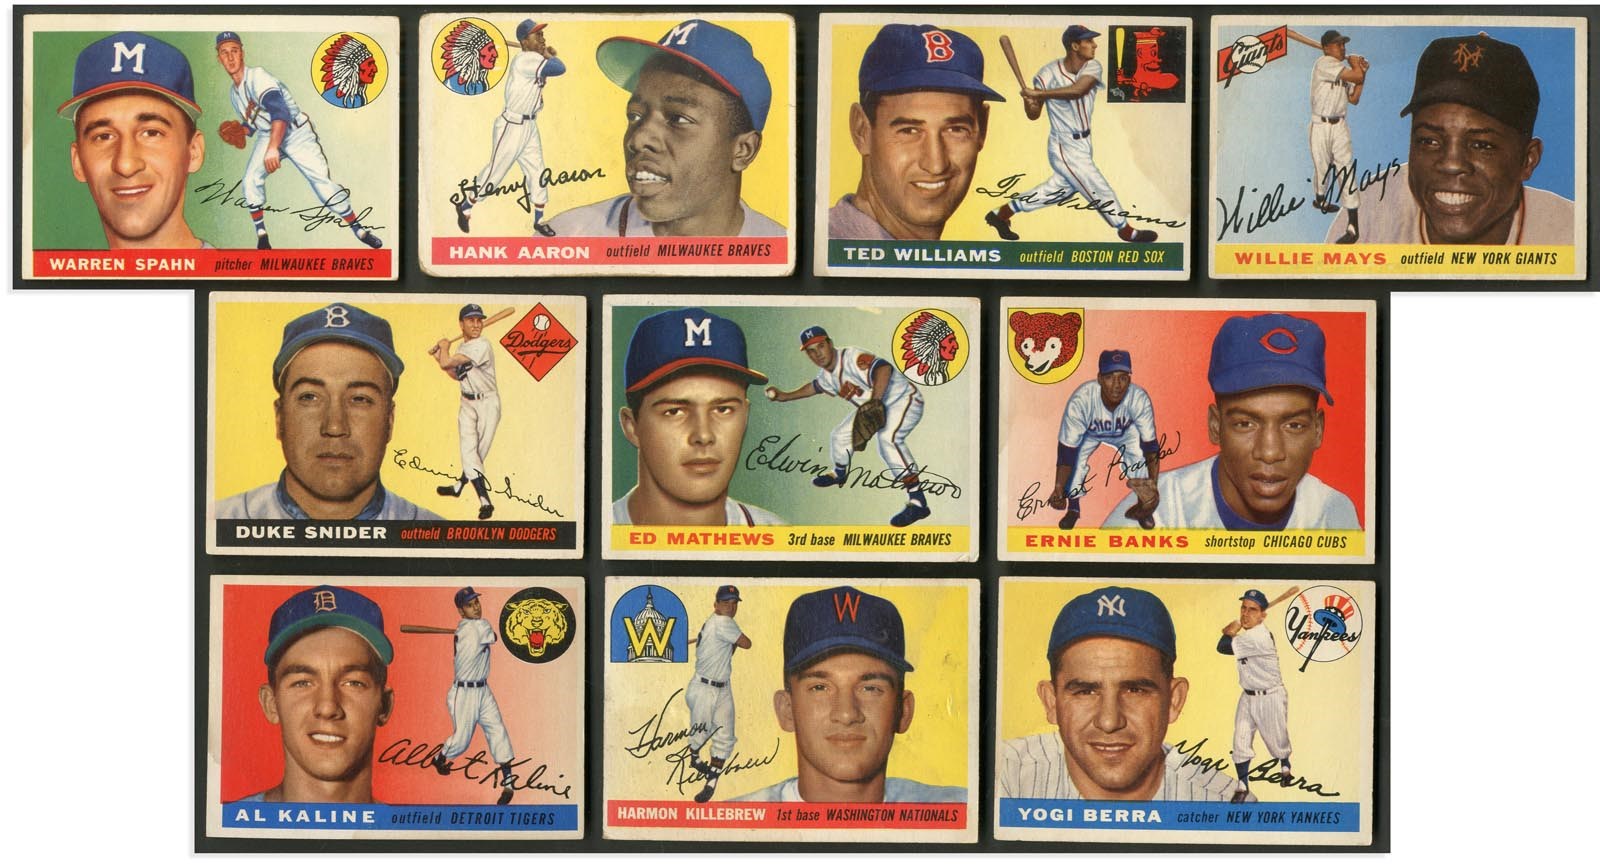 Baseball and Trading Cards - 1955 Topps Baseball Collection - Mays, Williams, Aaron (100+)